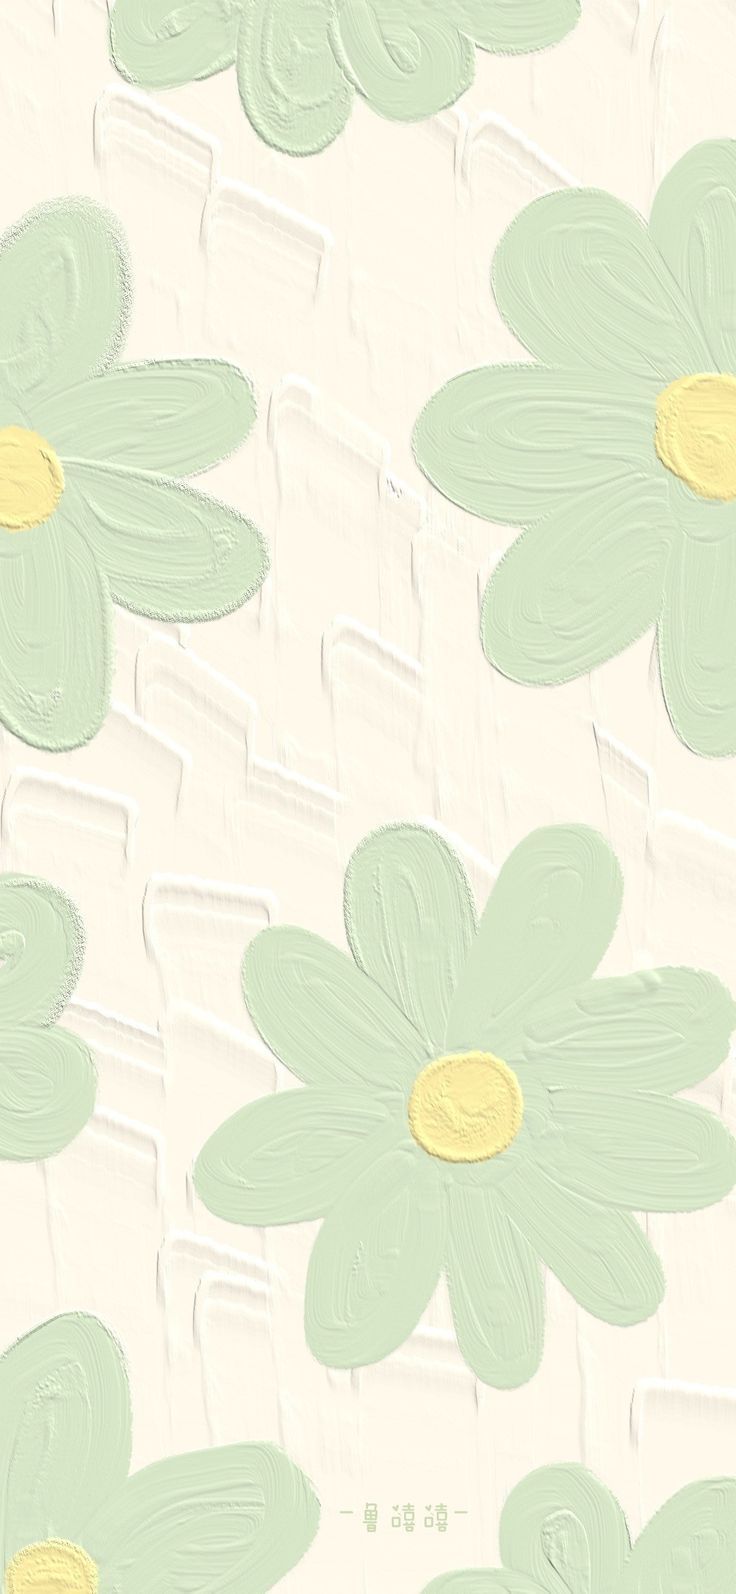 Pin by Marion ✨ on かべがみきろく in 2021 | Phone wallpaper patterns, Mint green wallpaper iph…  ...